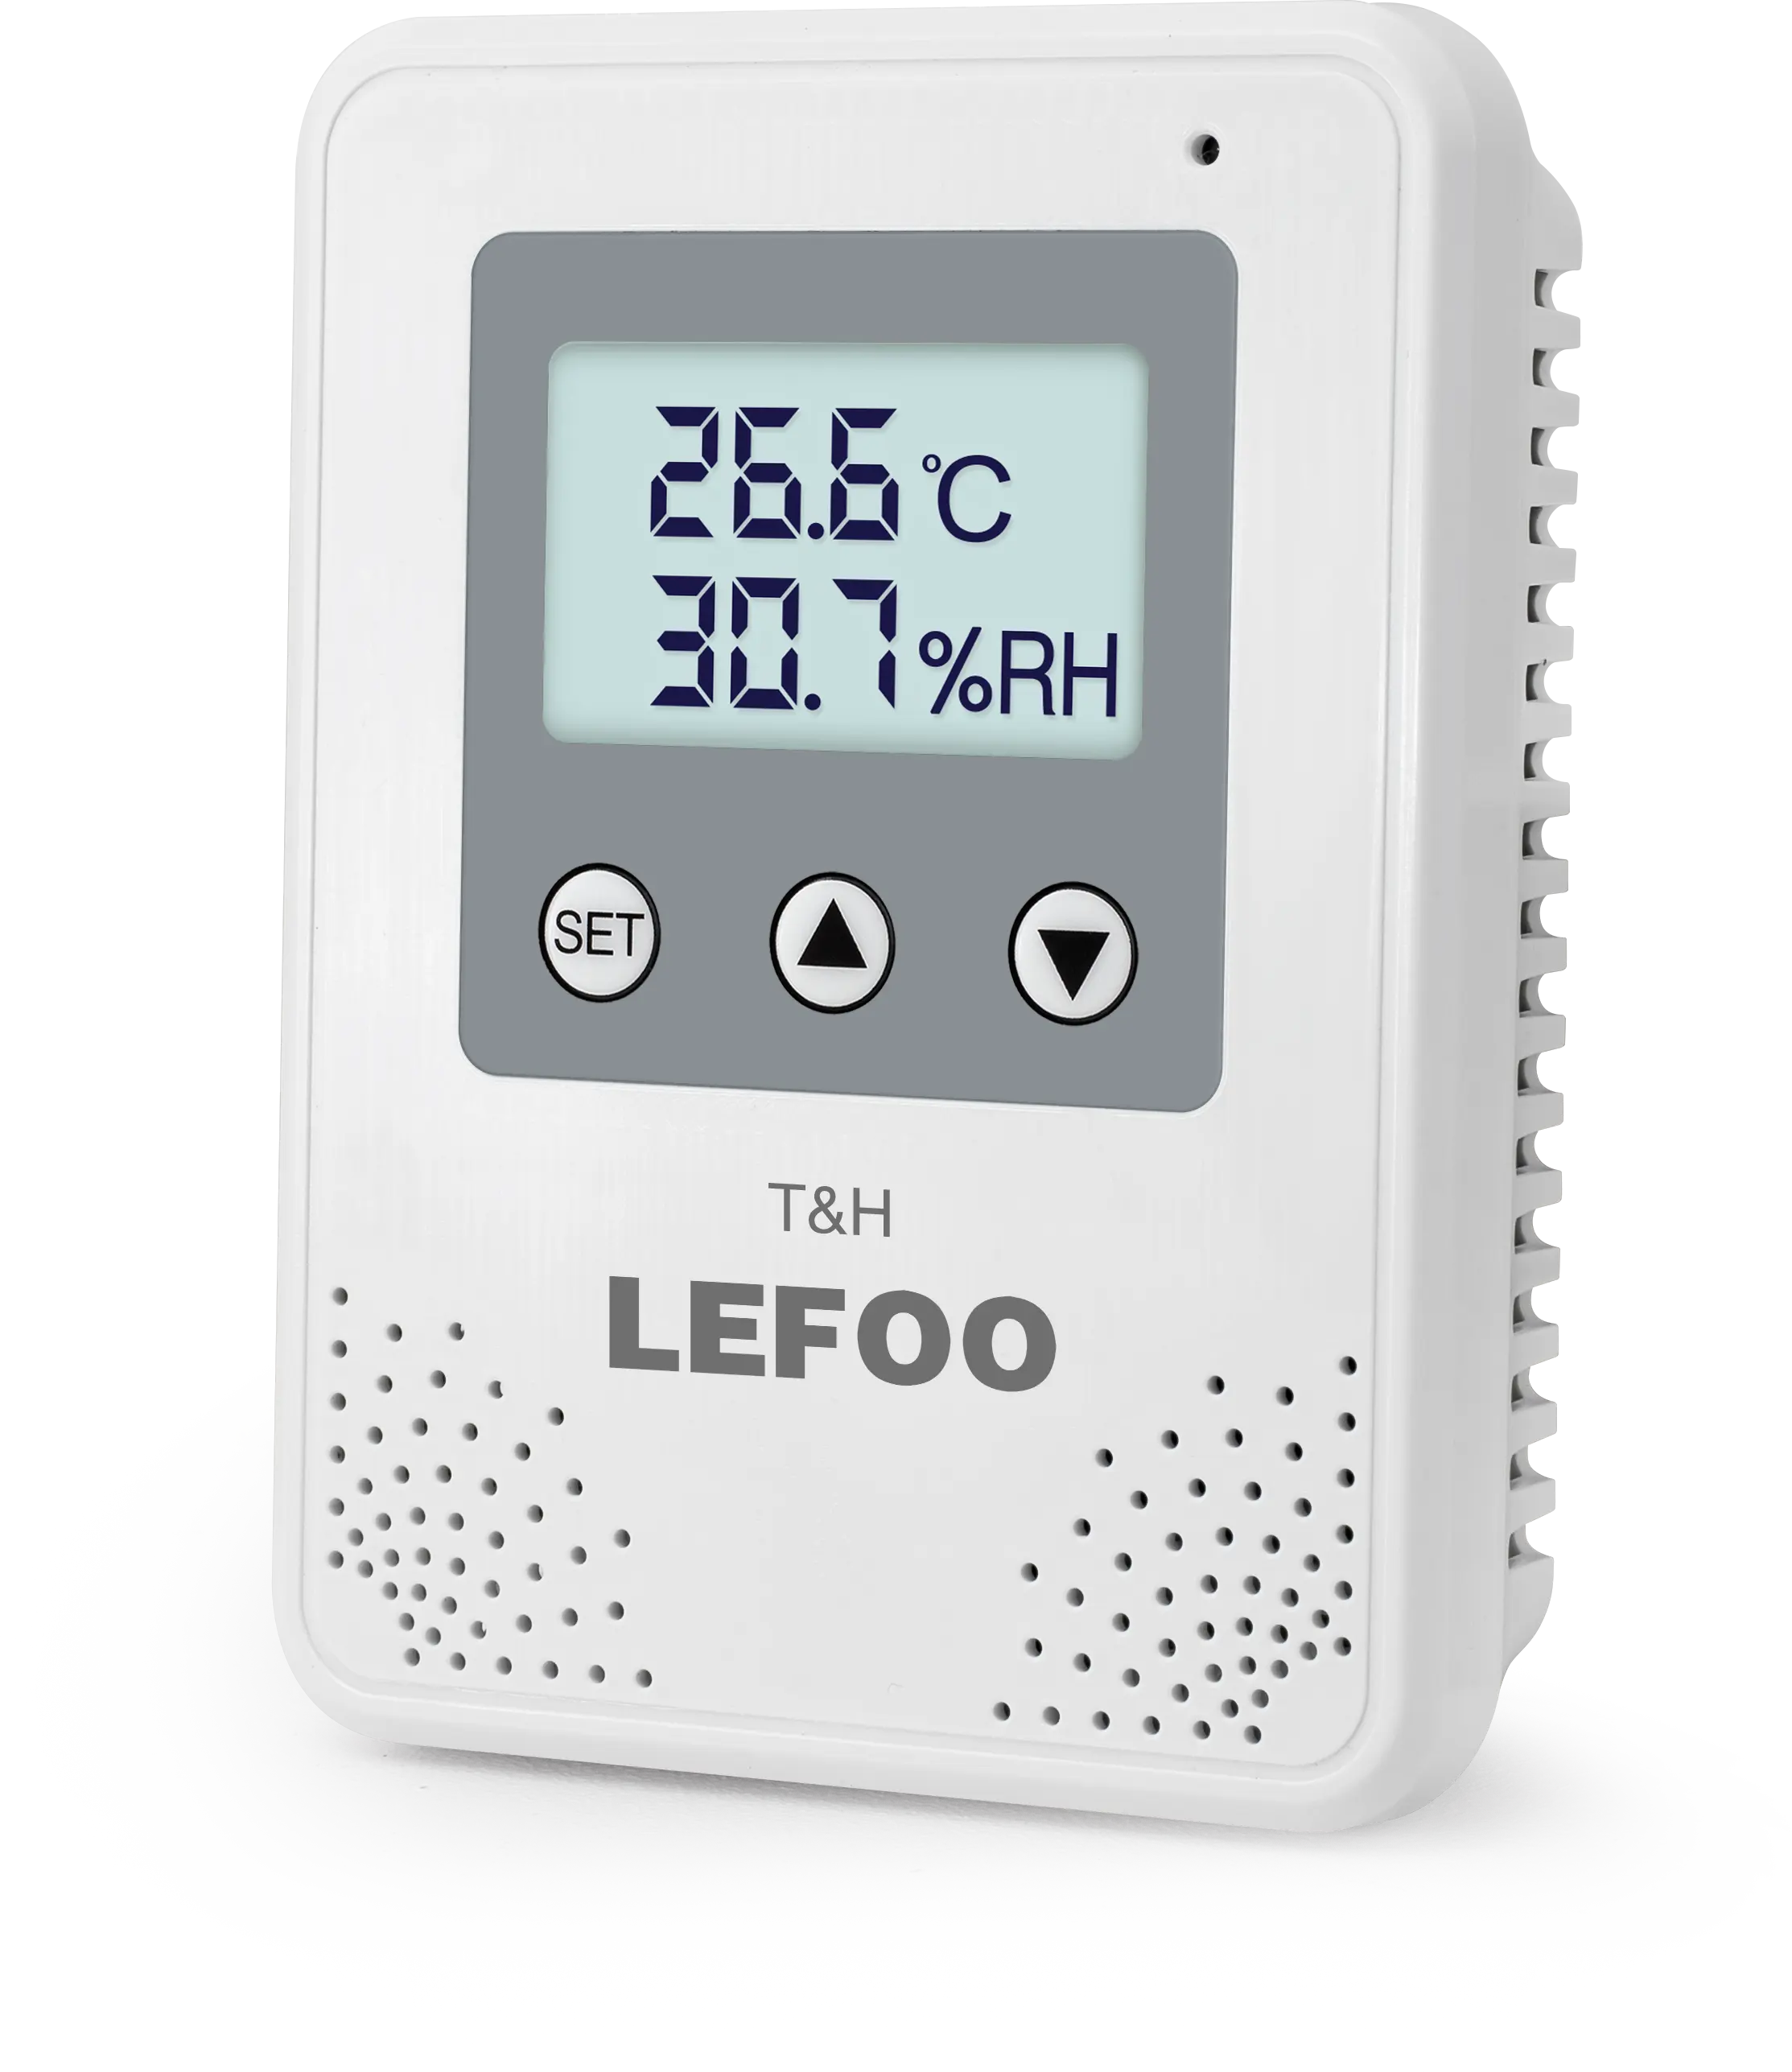 LEFOO CE ROHS certified LCD display temperature humidity controller transmitter sensor with relay and alarm function